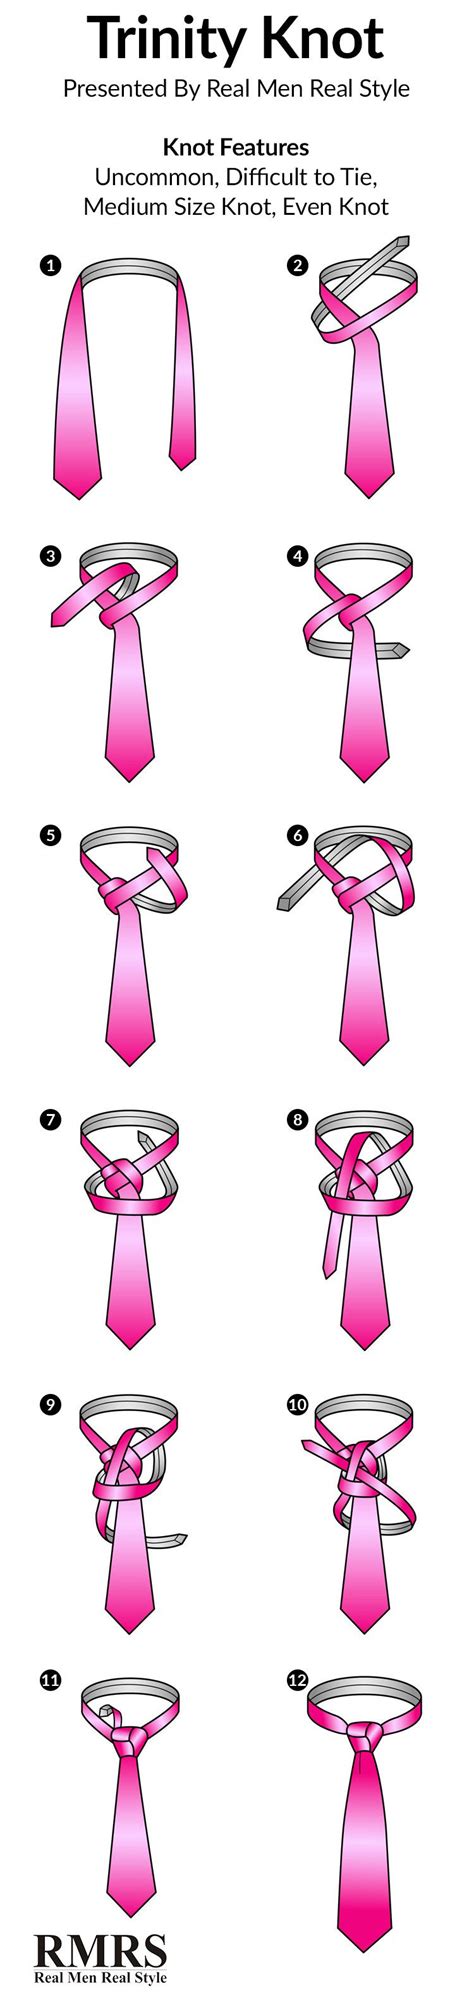 How to tie a tie, a step by step explanation. 3 Crazy Complex Tie Knots Made Easy! | Necktie Knot Tutorial